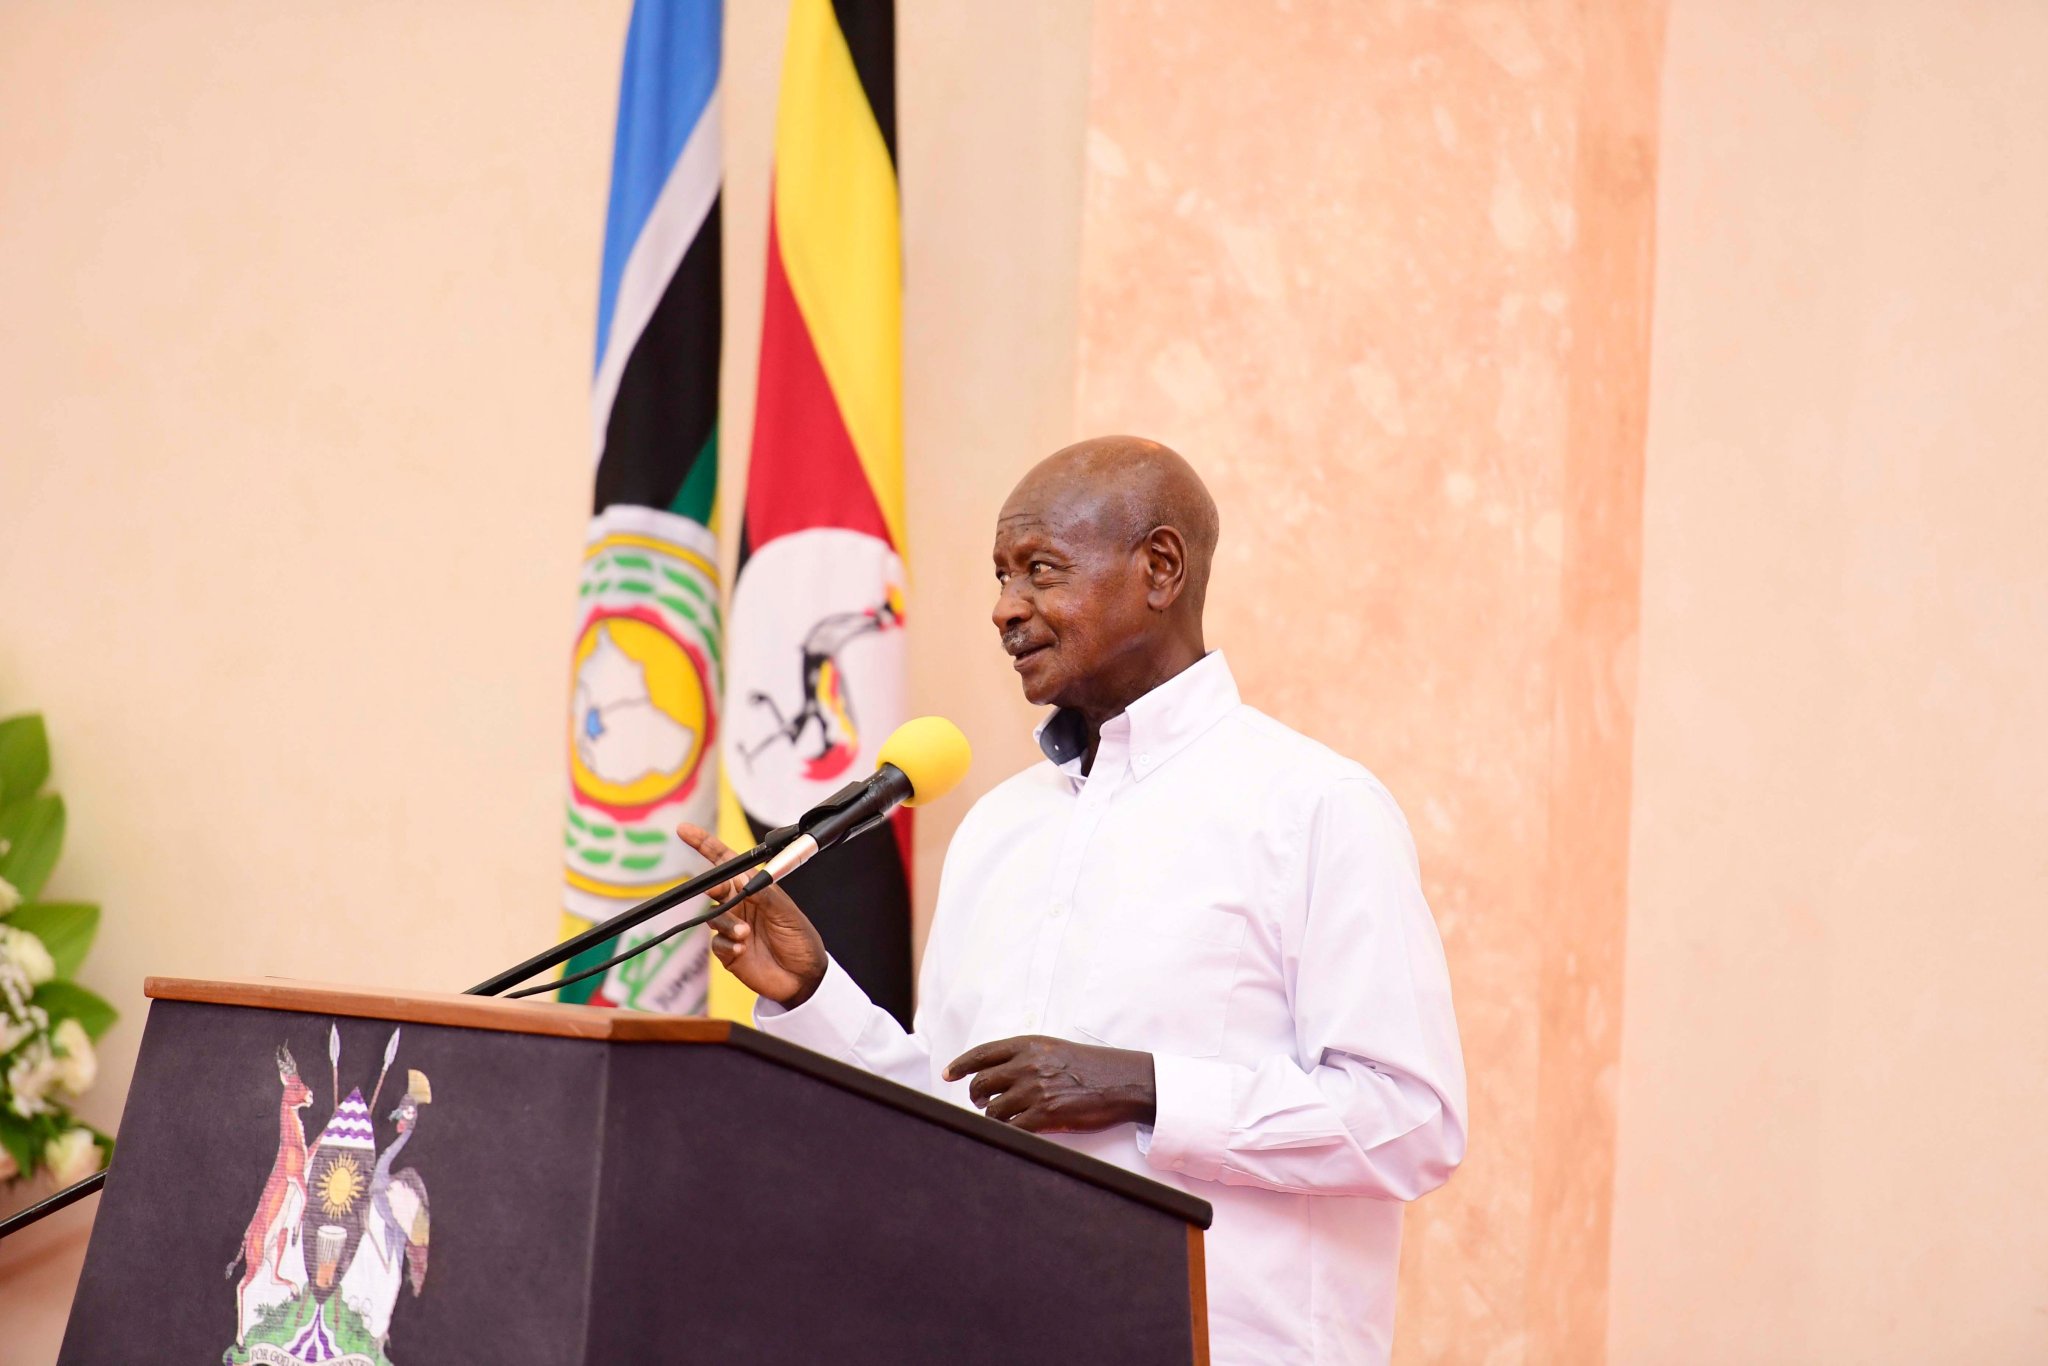 President Museveni to Offer More Guidelines to Fight Covid-19 Today